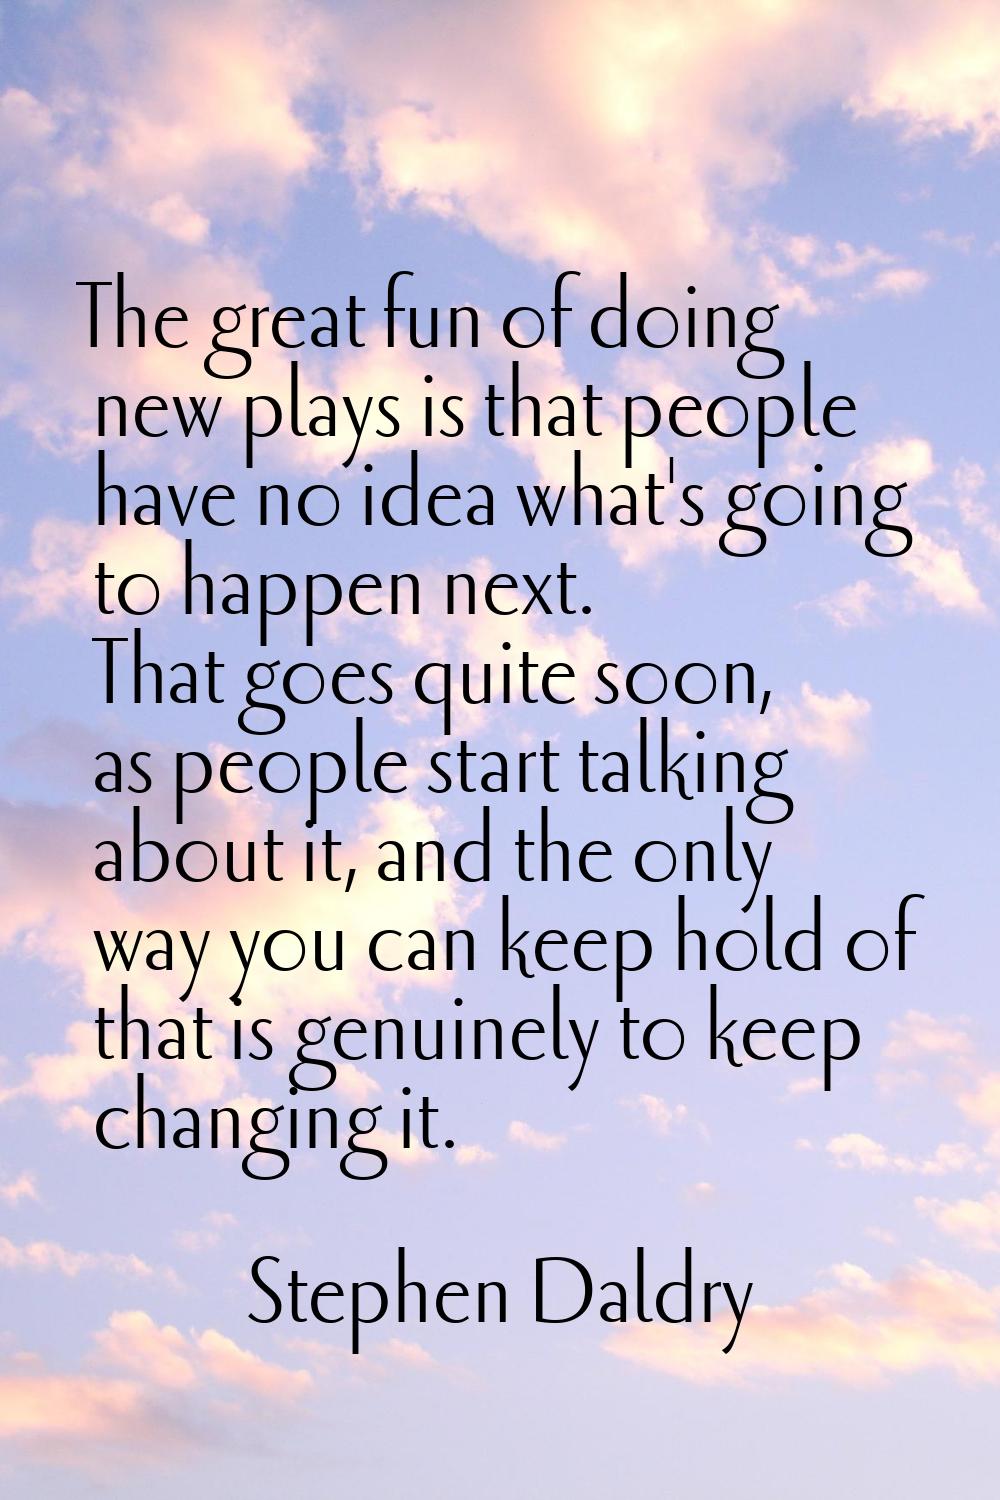 The great fun of doing new plays is that people have no idea what's going to happen next. That goes